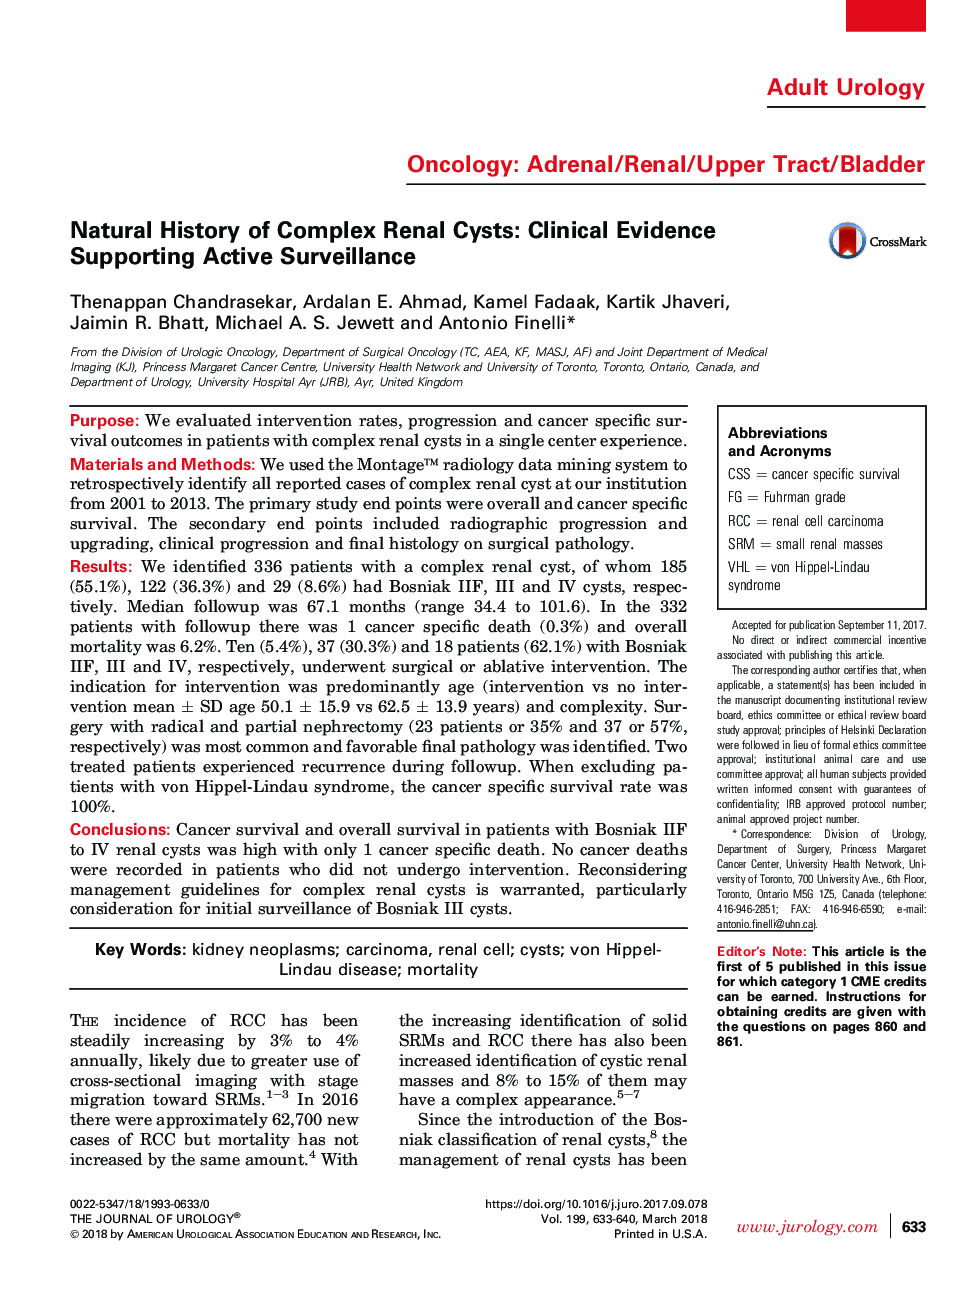 Natural History of Complex Renal Cysts: Clinical Evidence Supporting Active Surveillance